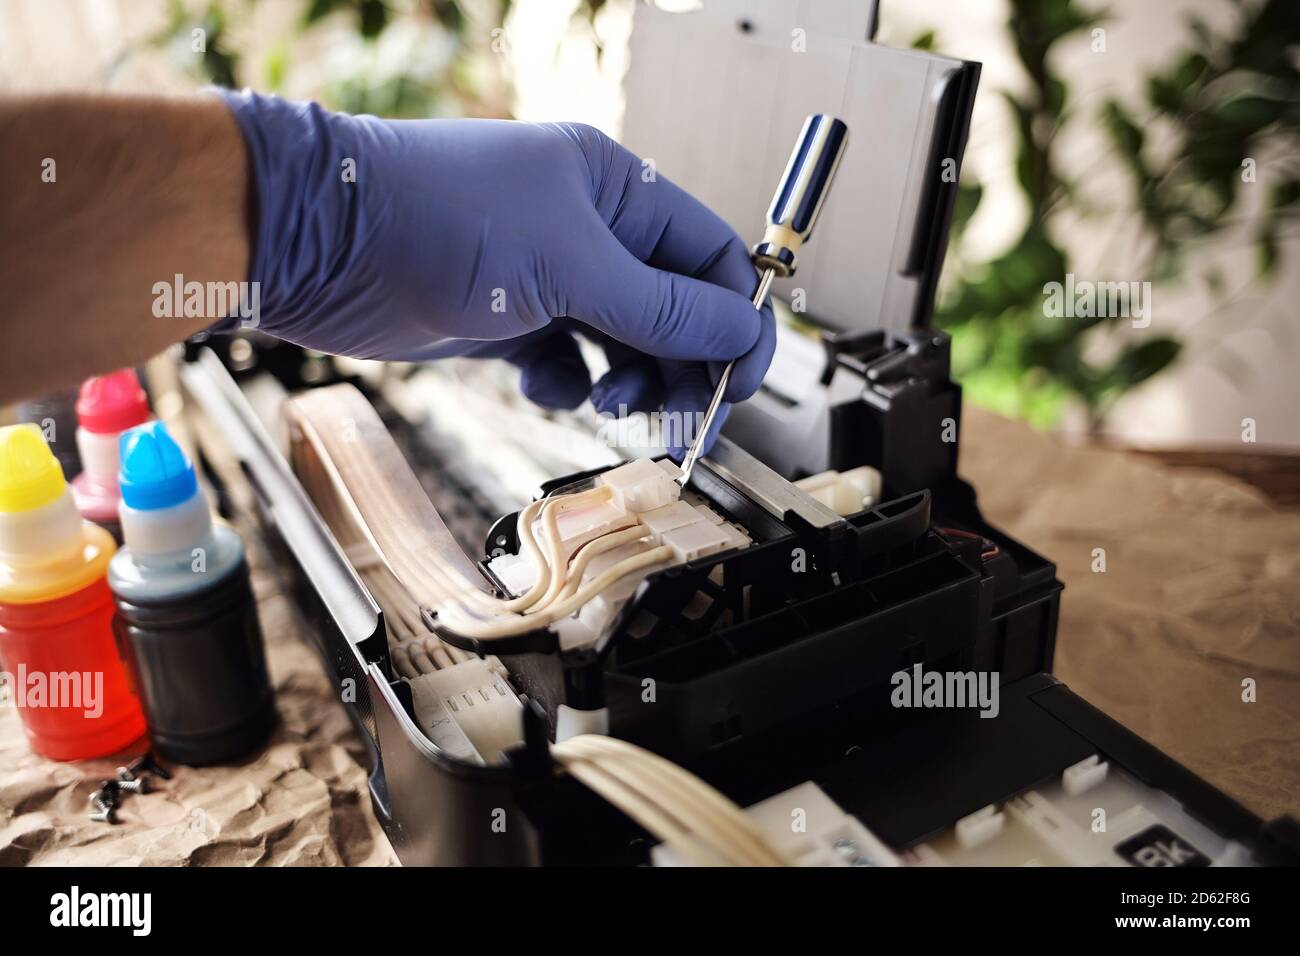 Refilling printer cartridges with multi-colored ink. Background Stock Photo